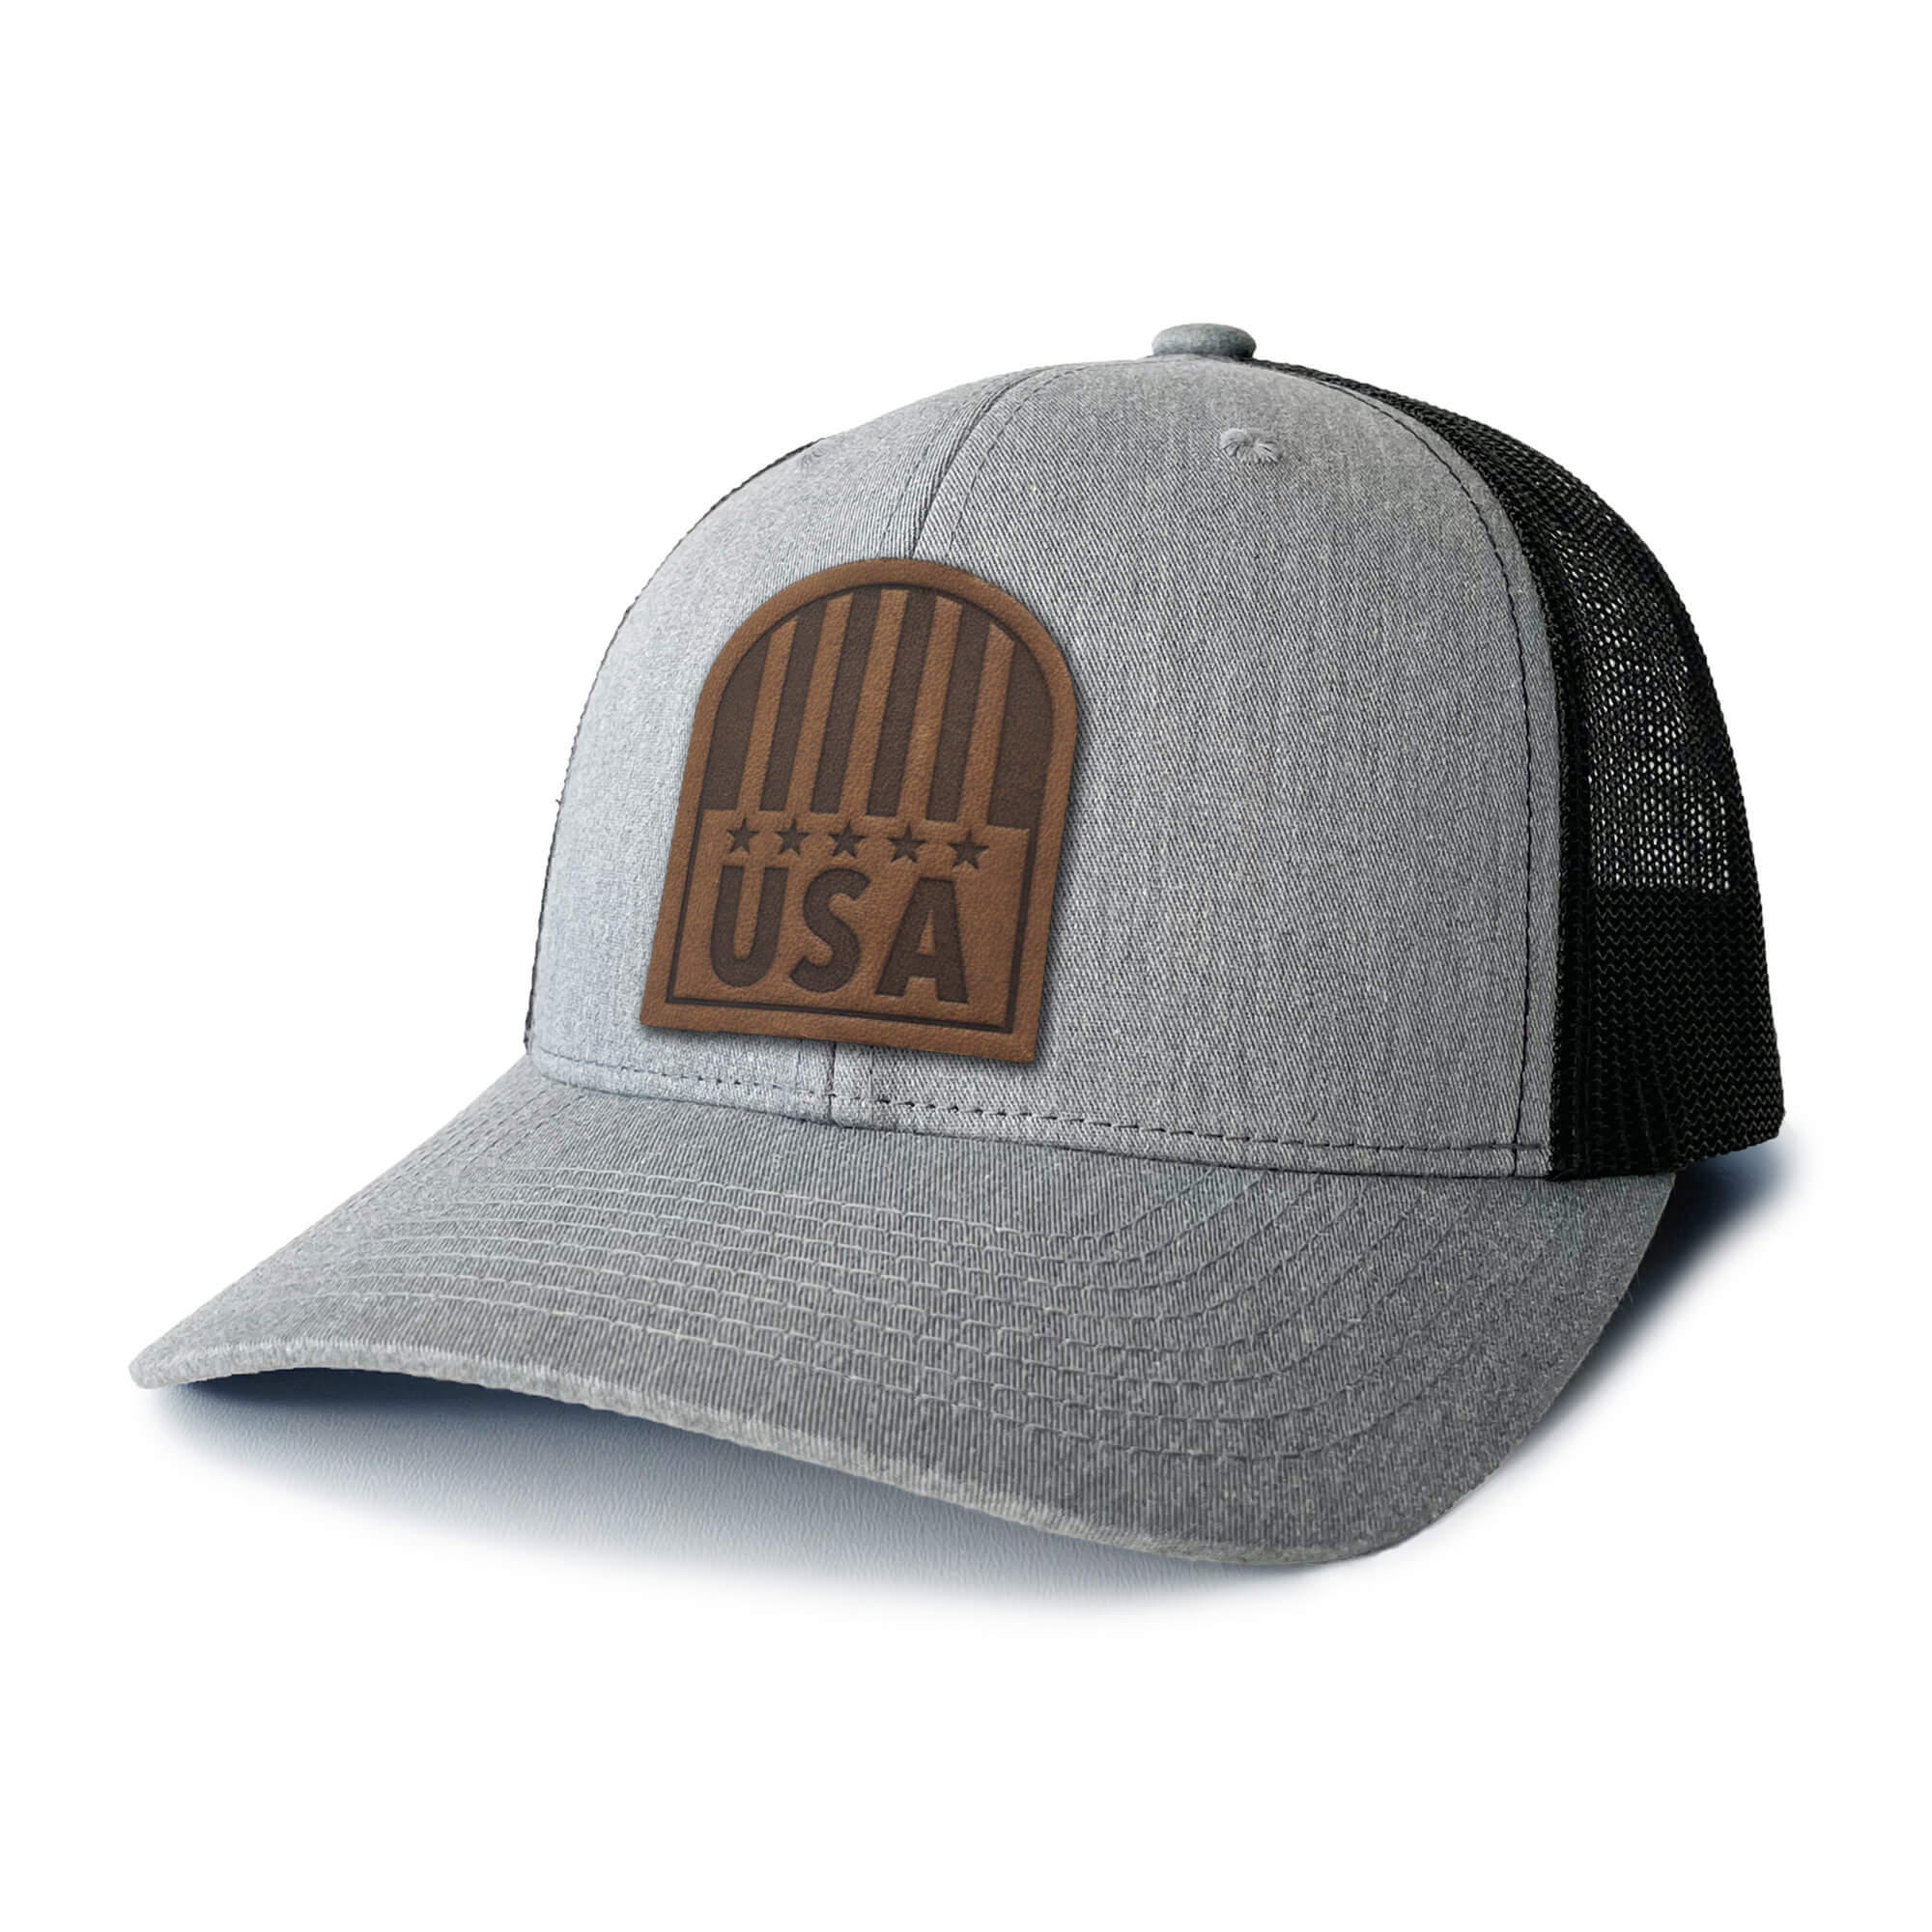 Heather Grey and white trucker hat with full-grain leather patch of USA Crest | BLACK-003-013, CHARC-003-013, NAVY-003-013, HGREY-003-013, MOSS-003-013, BROWN-003-013